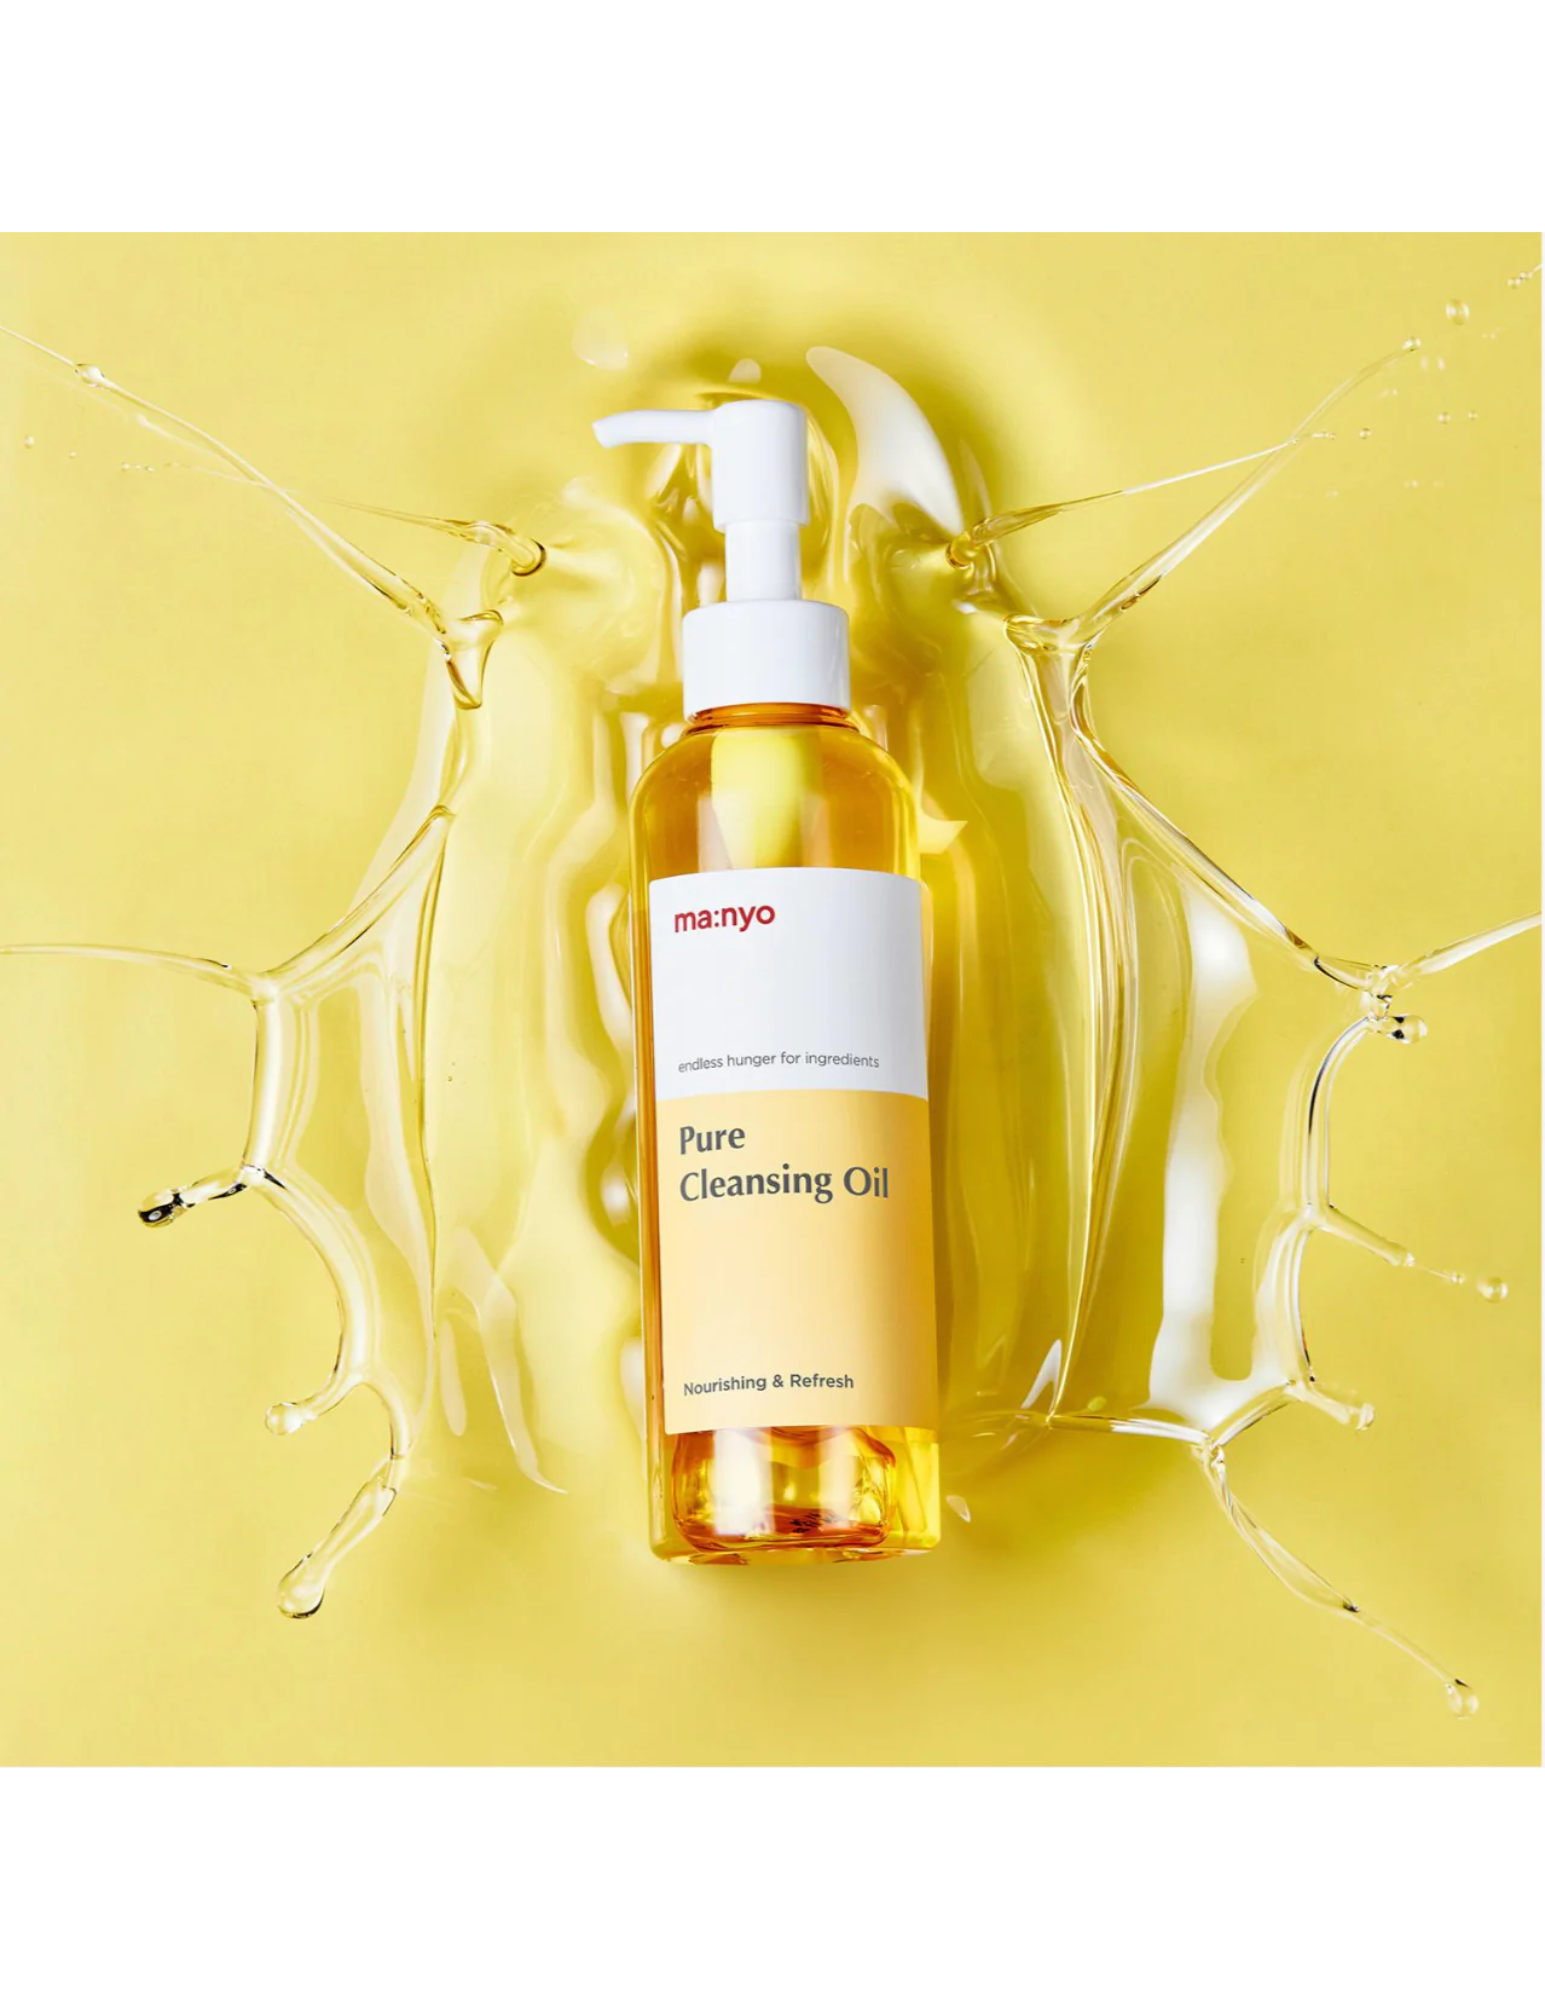 MA:NYO Pure Cleansing Oil - Unique Bunny